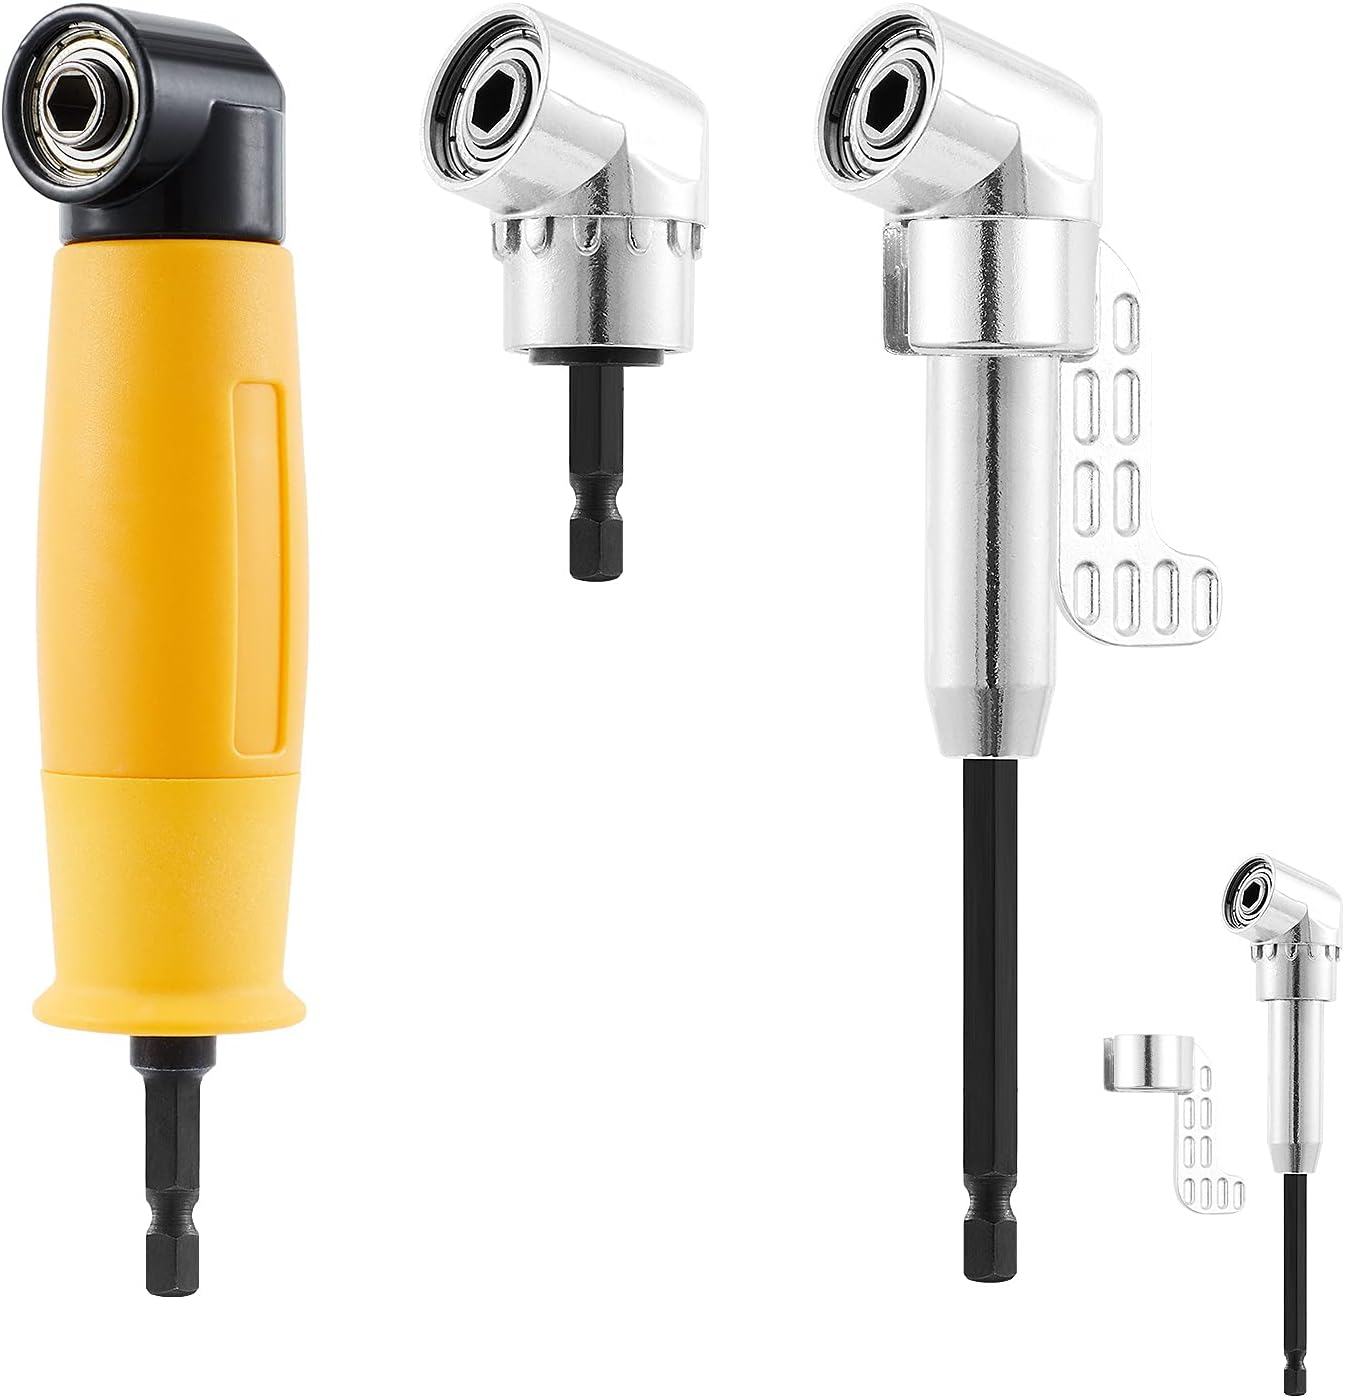 ZOTOP 90/105 Degree Right Angle Drill, 3 PCS Angle Extension Power Drill Attachment with 1/4'' Hex Impact Shank, Flexible Shaft Adapt